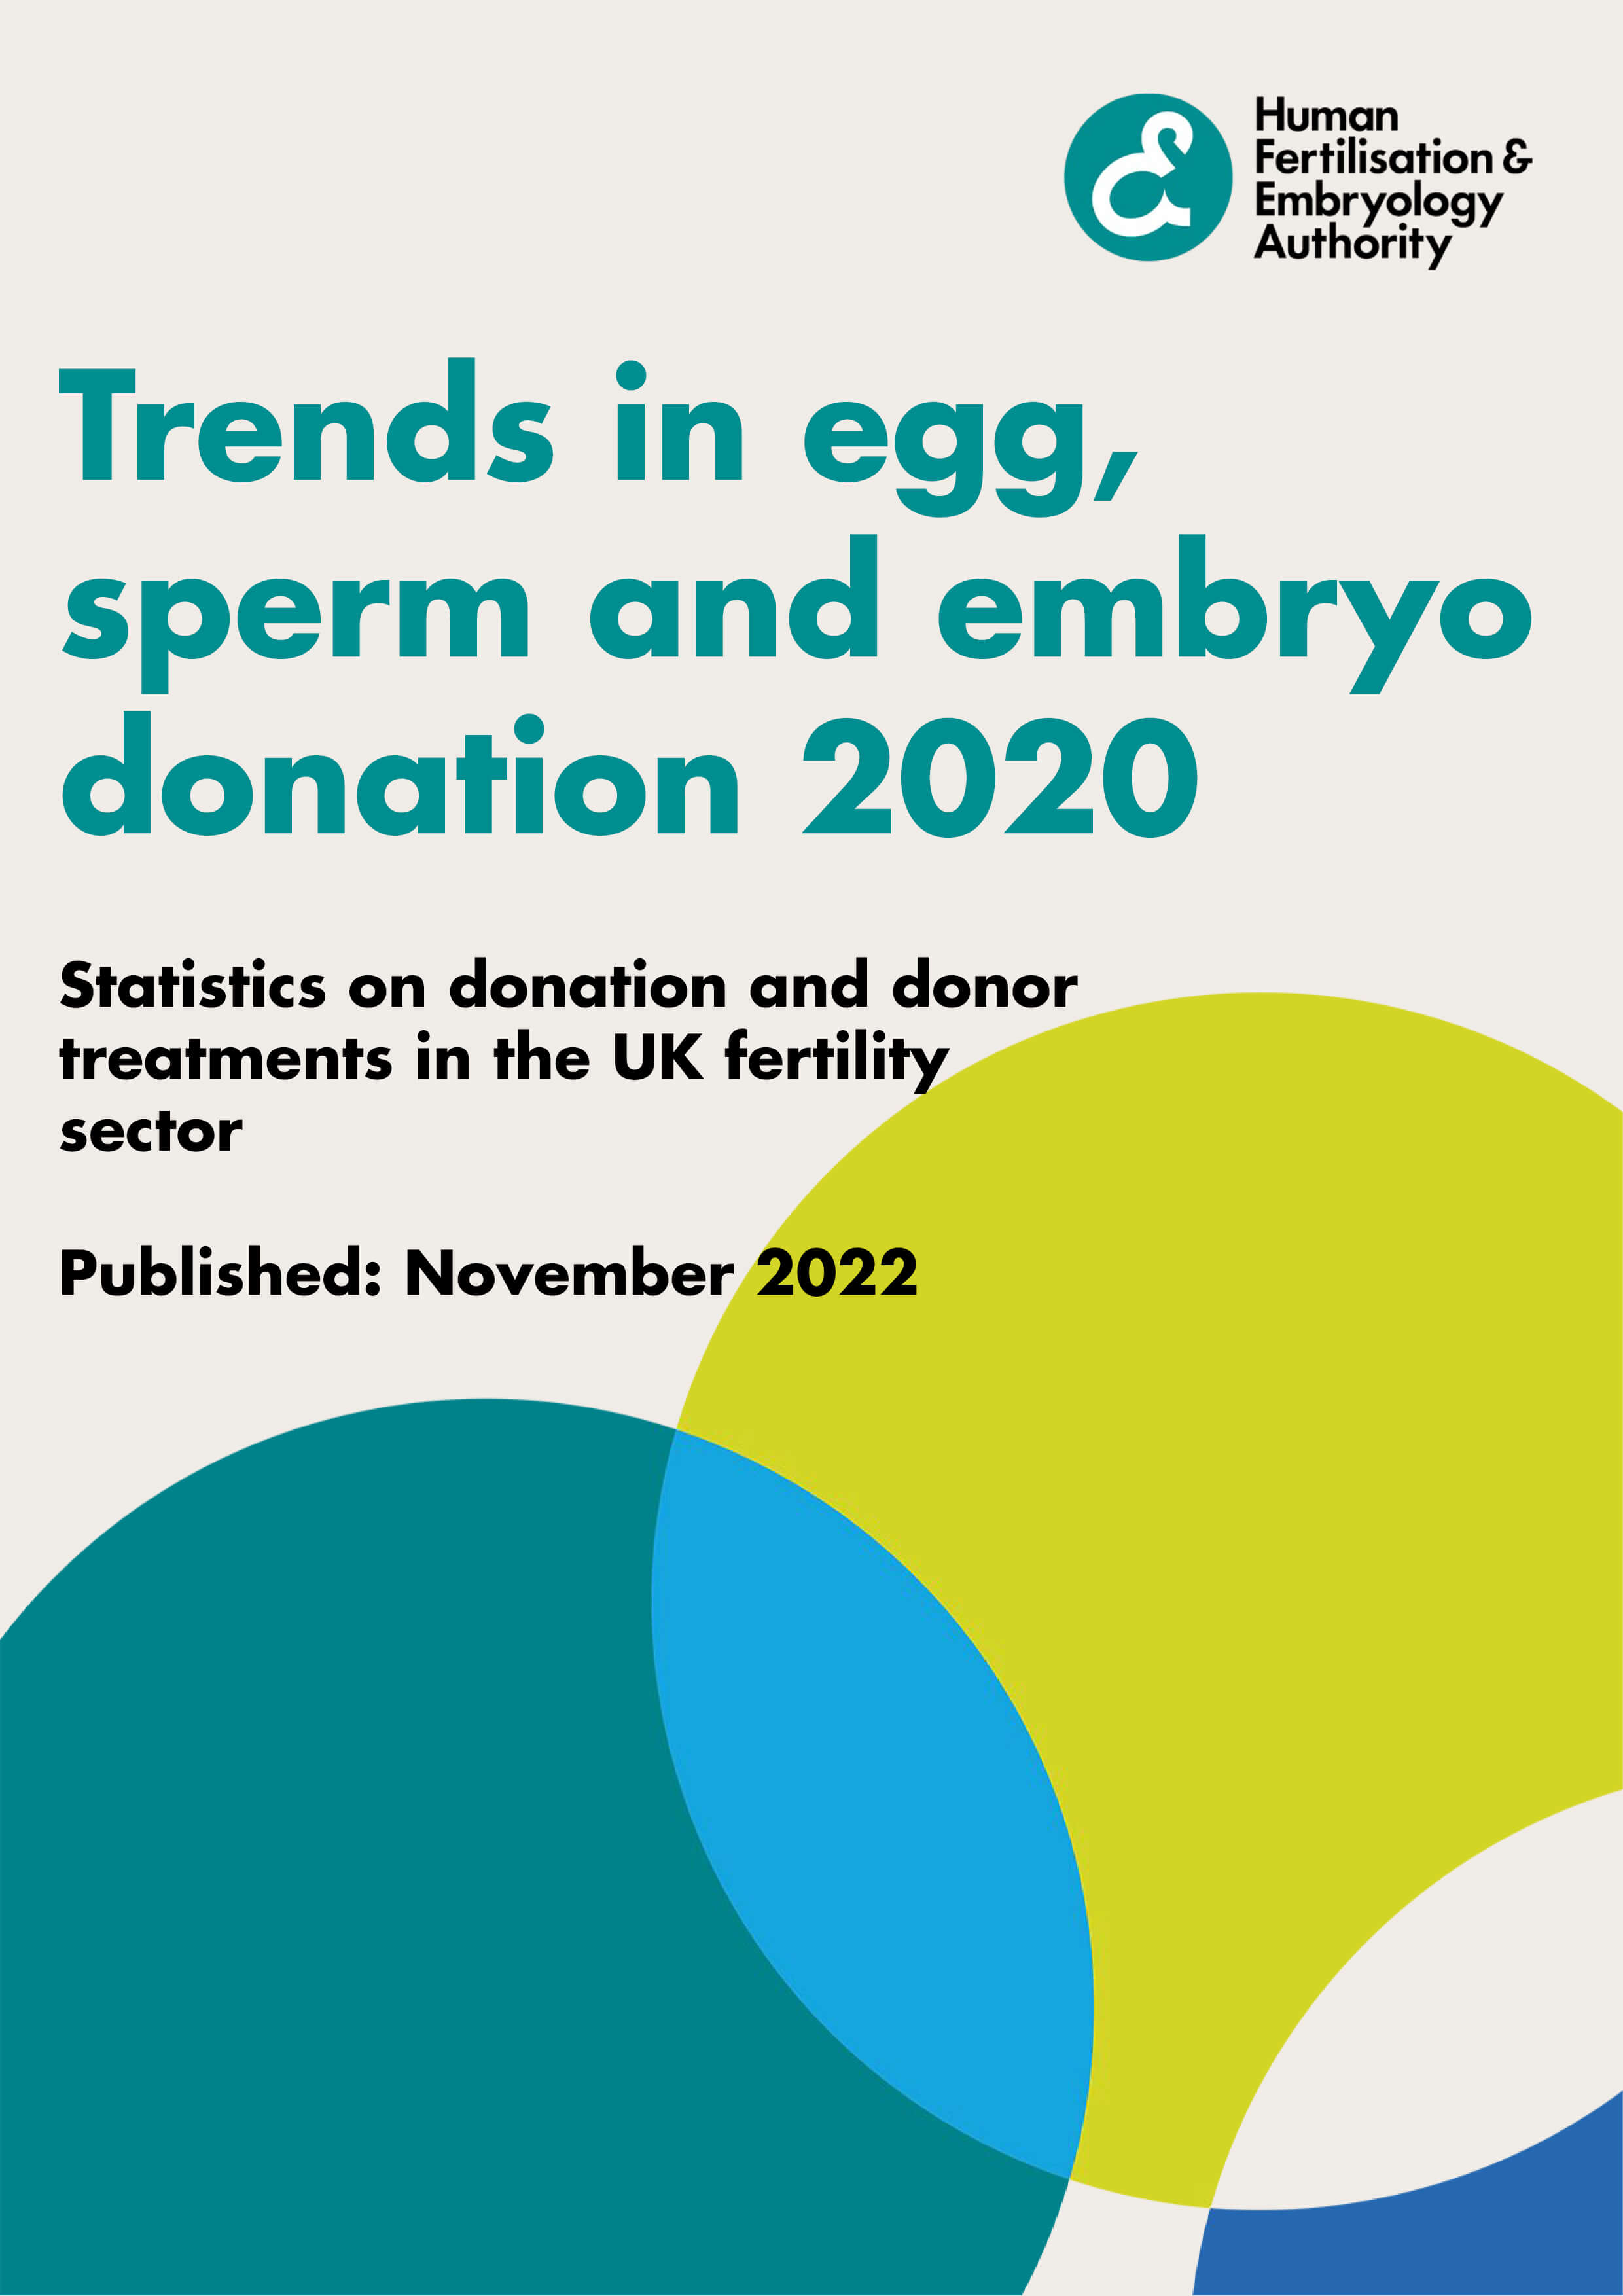 Trends in egg, sperm and embryo donation 2020